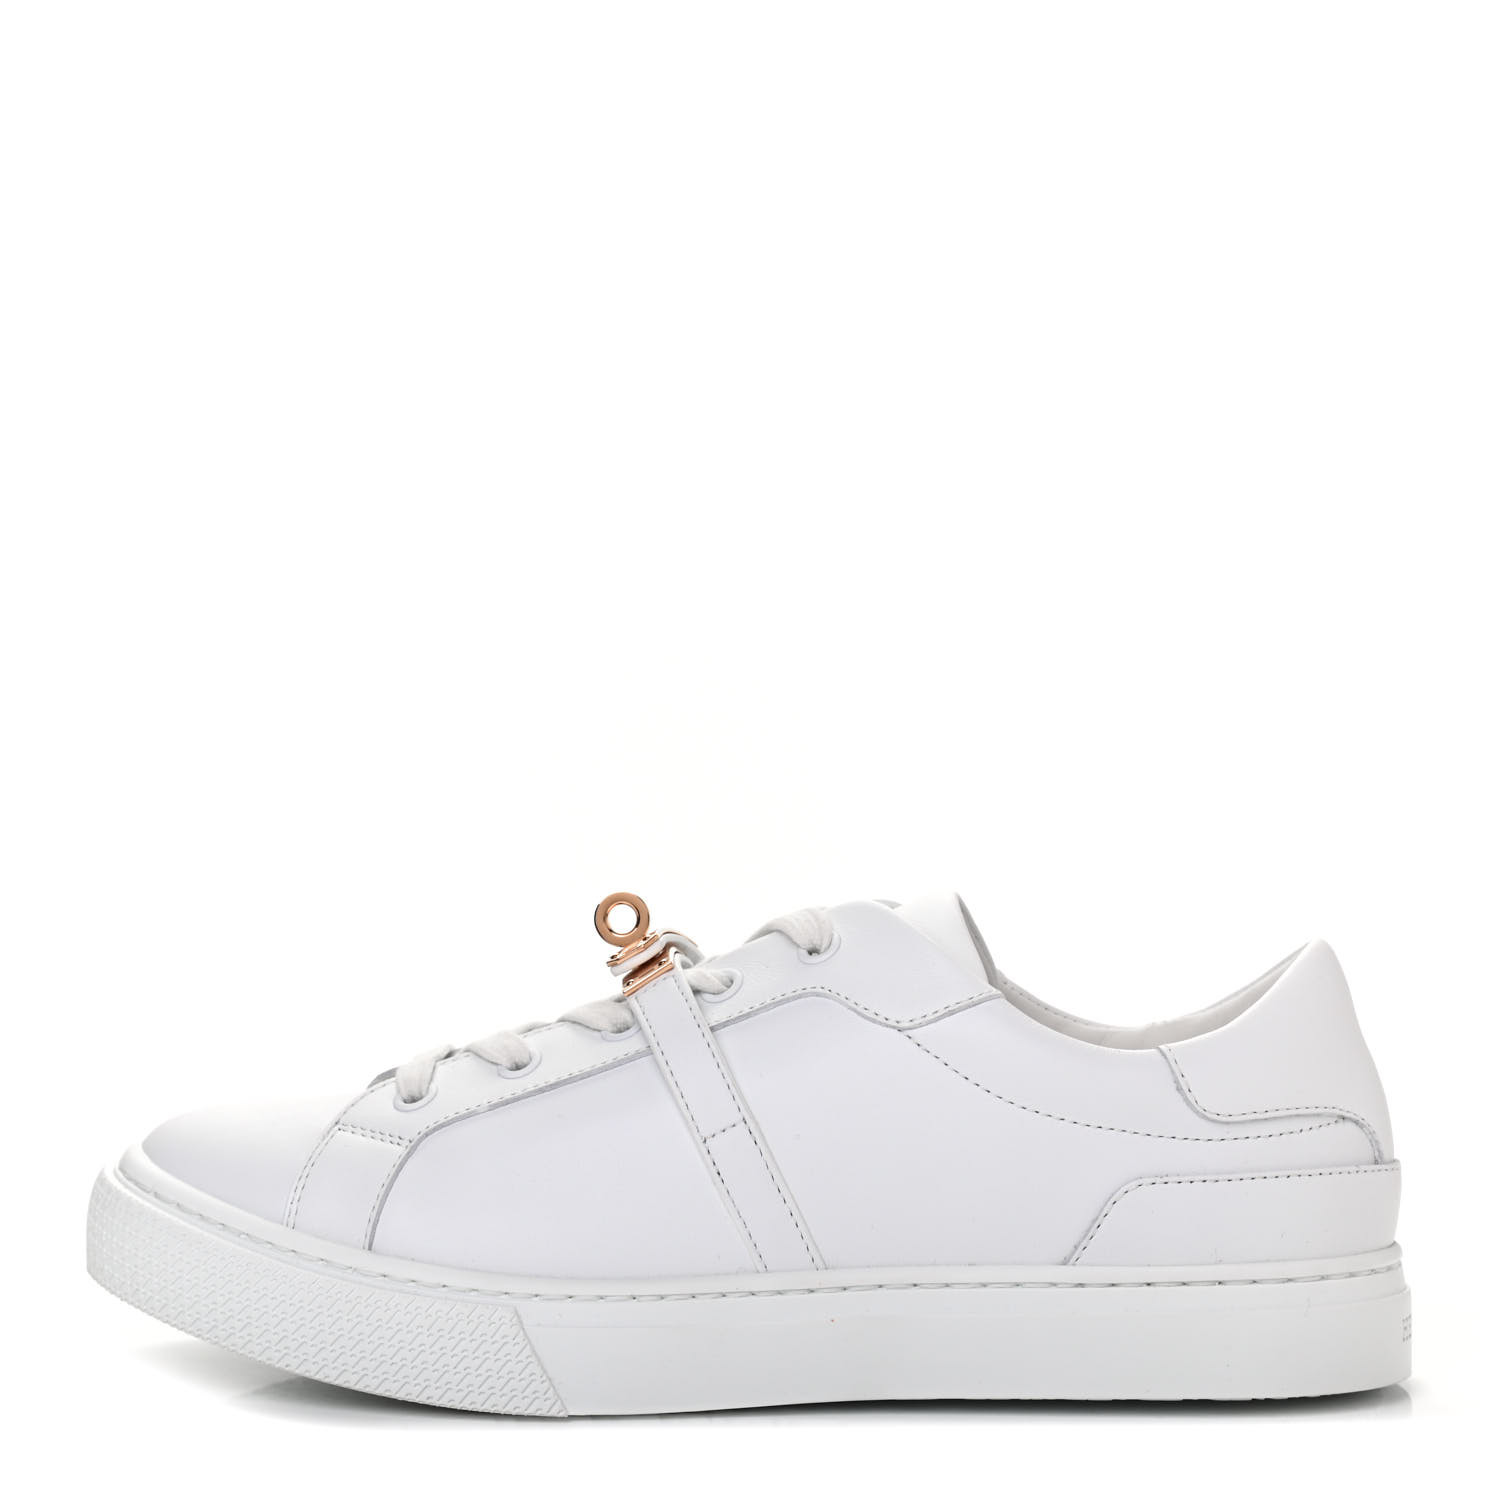 HERMES Calfskin Day Sneakers 39 White 799128 | FASHIONPHILE